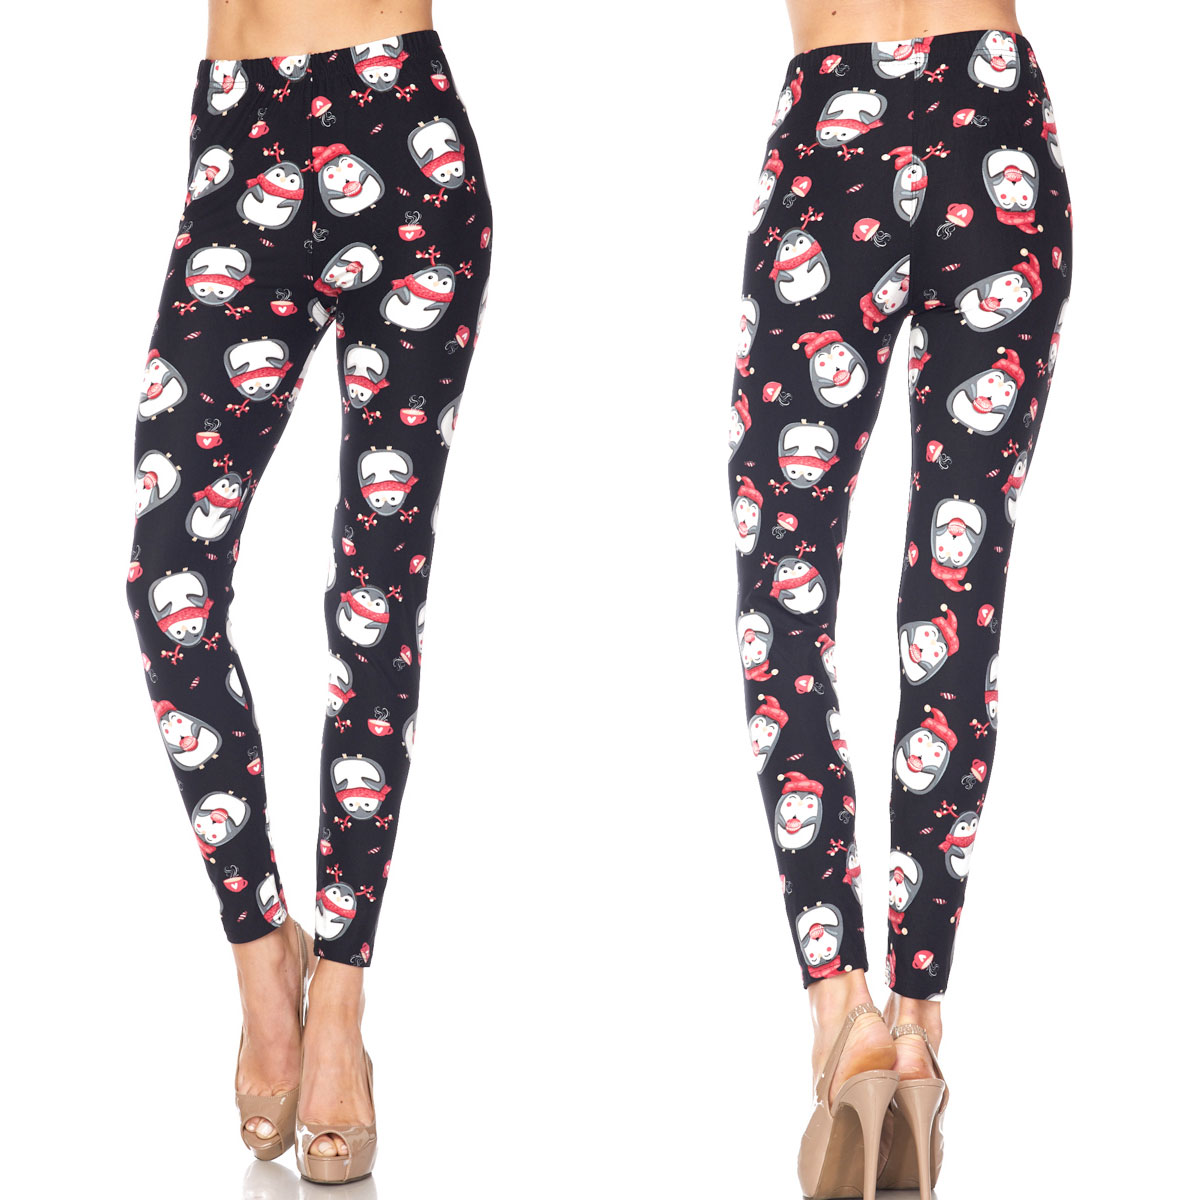 1284 - Leggings (Brushed Fiber Prints) L006 Lighthouse and Anchors Brushed Fiber Leggings - Ankle Length Print  - One Size Fits (S-L)